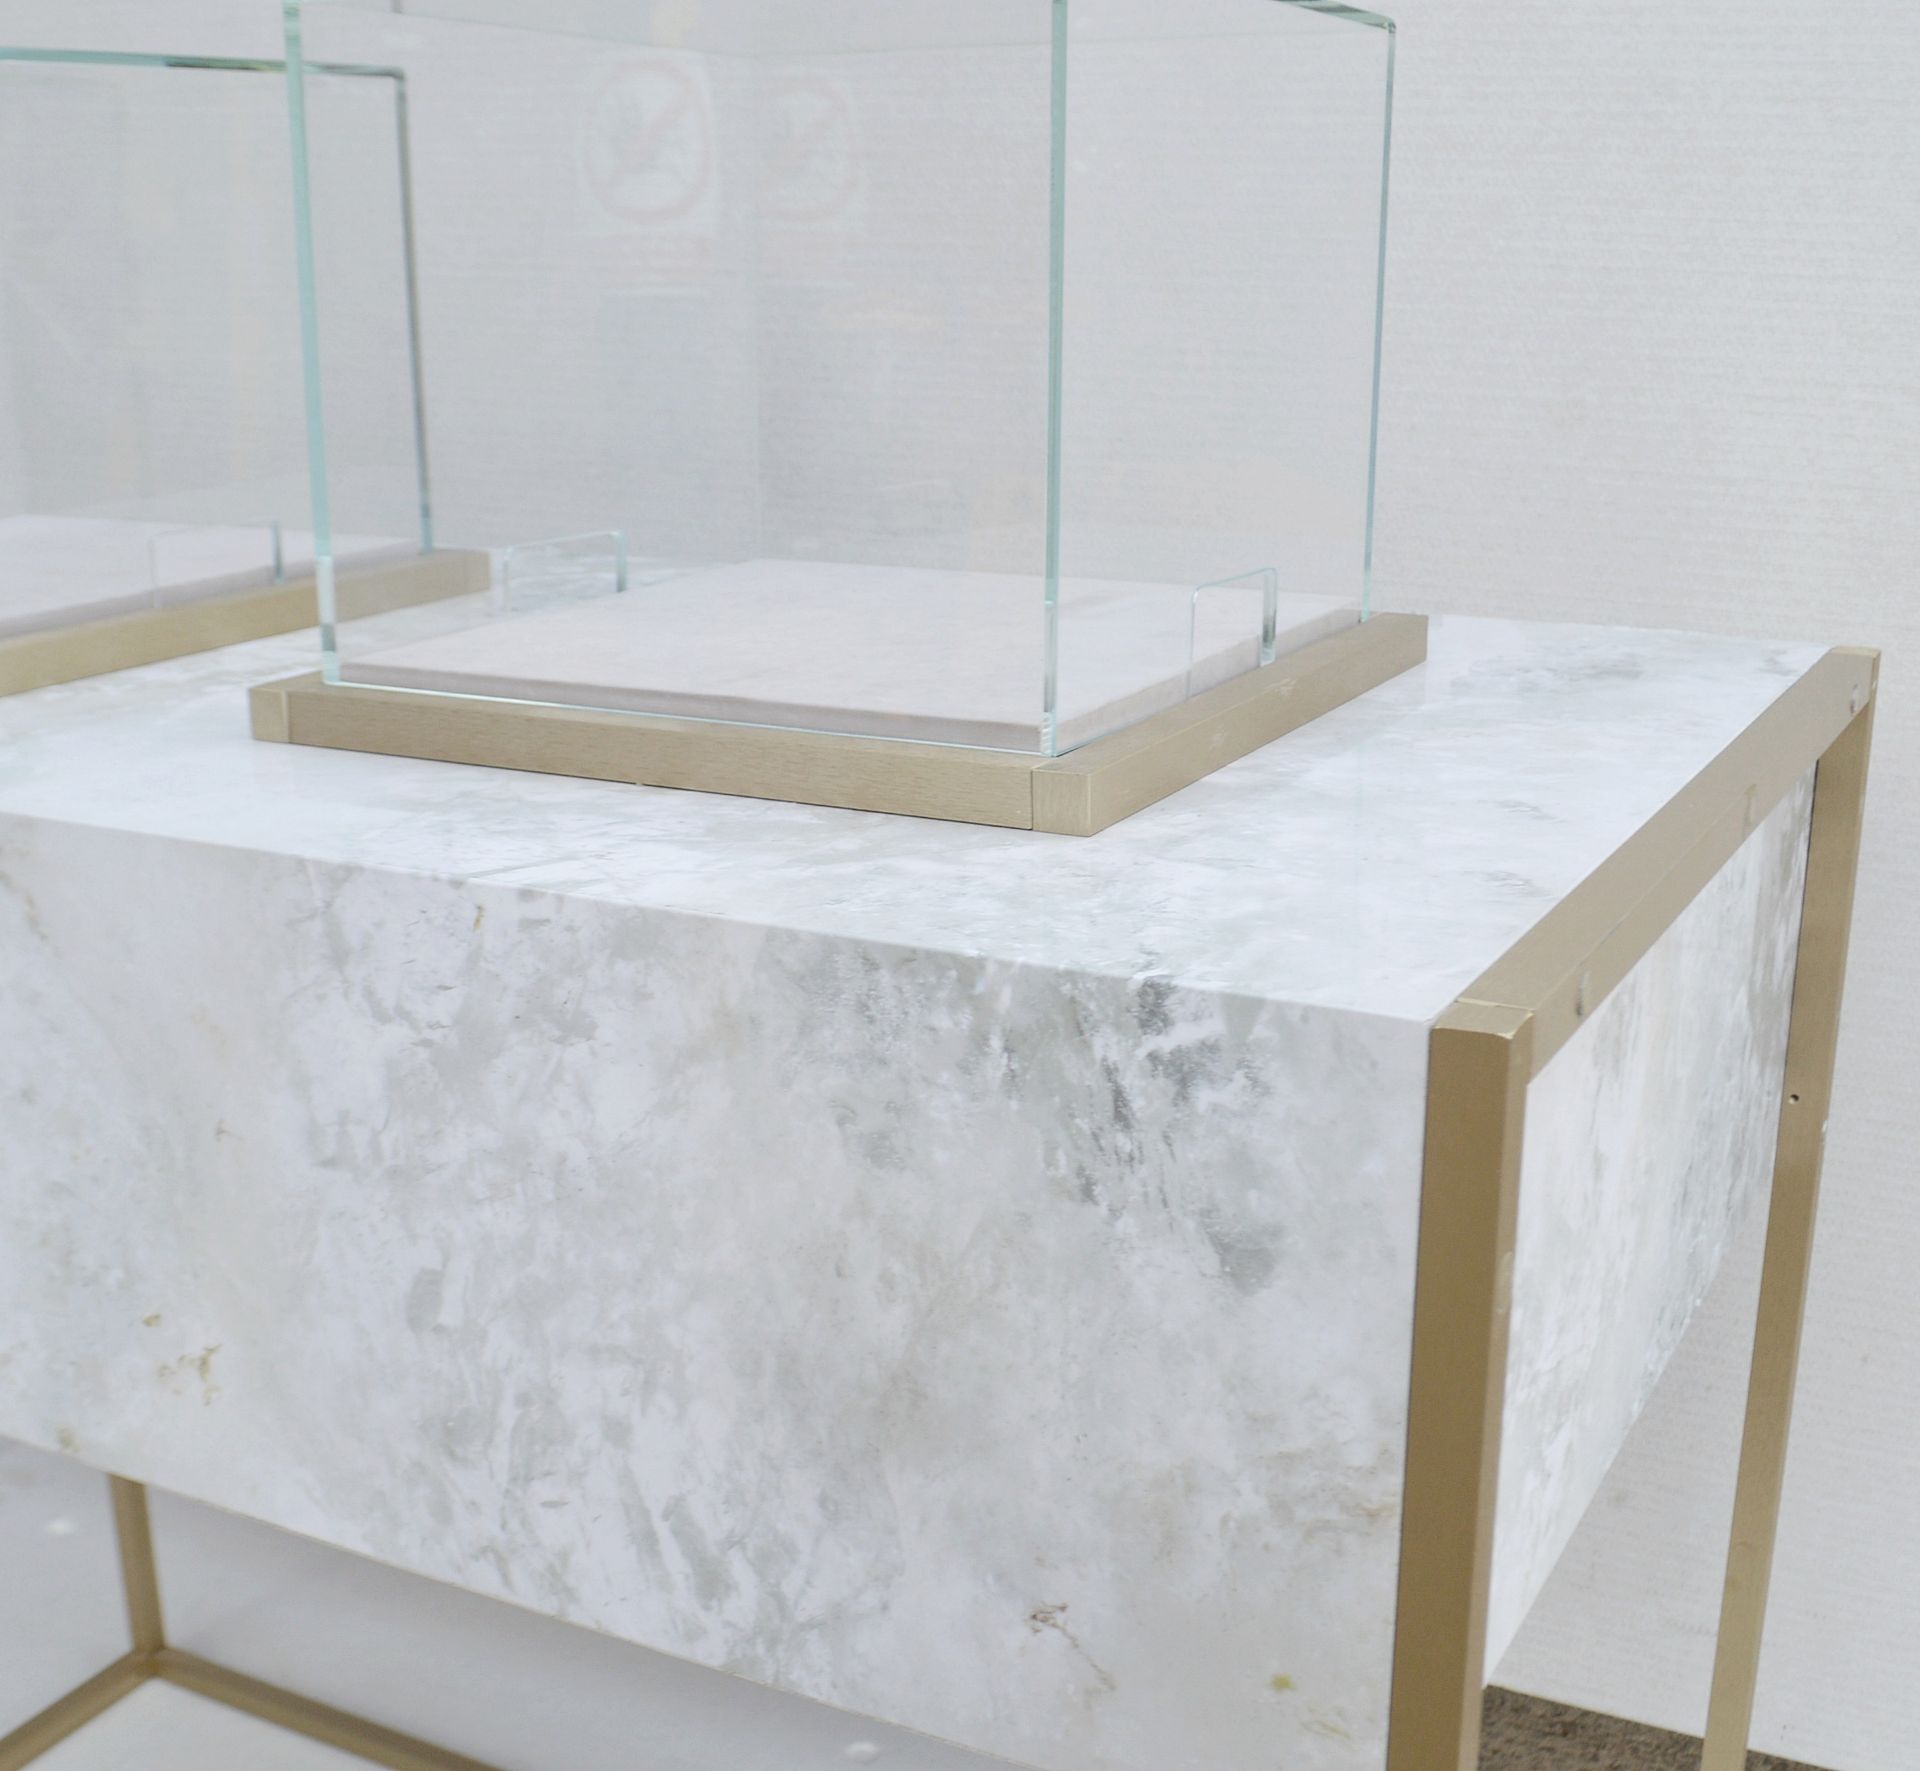 1 x BALDI Designer Retail Display Counter Featuring A Marble Effect Aesthetic And 2 x Glass Cloches - Image 7 of 7